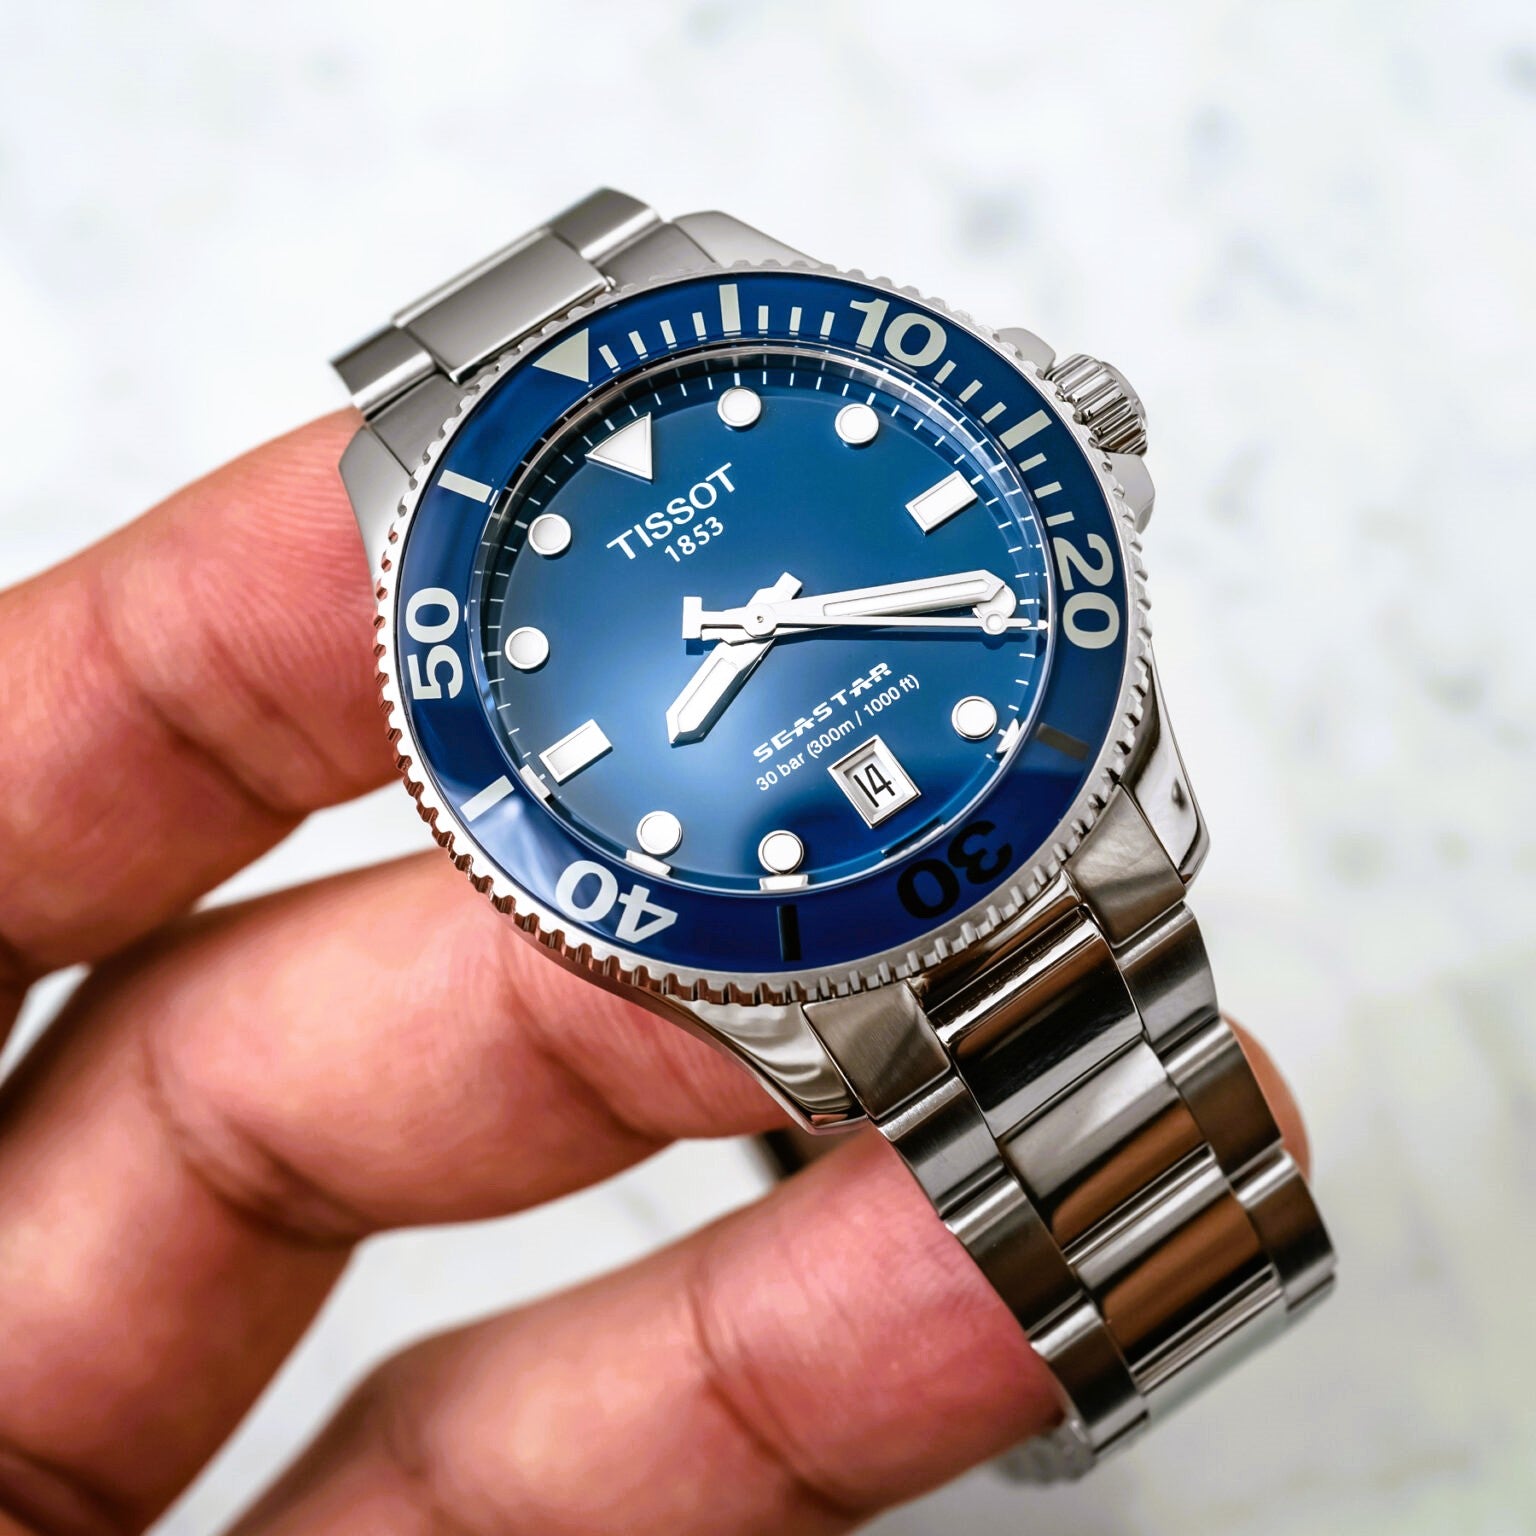 Omega Seamaster vs Tissot Seastar: Which Reigns Supreme? Find Out Now!